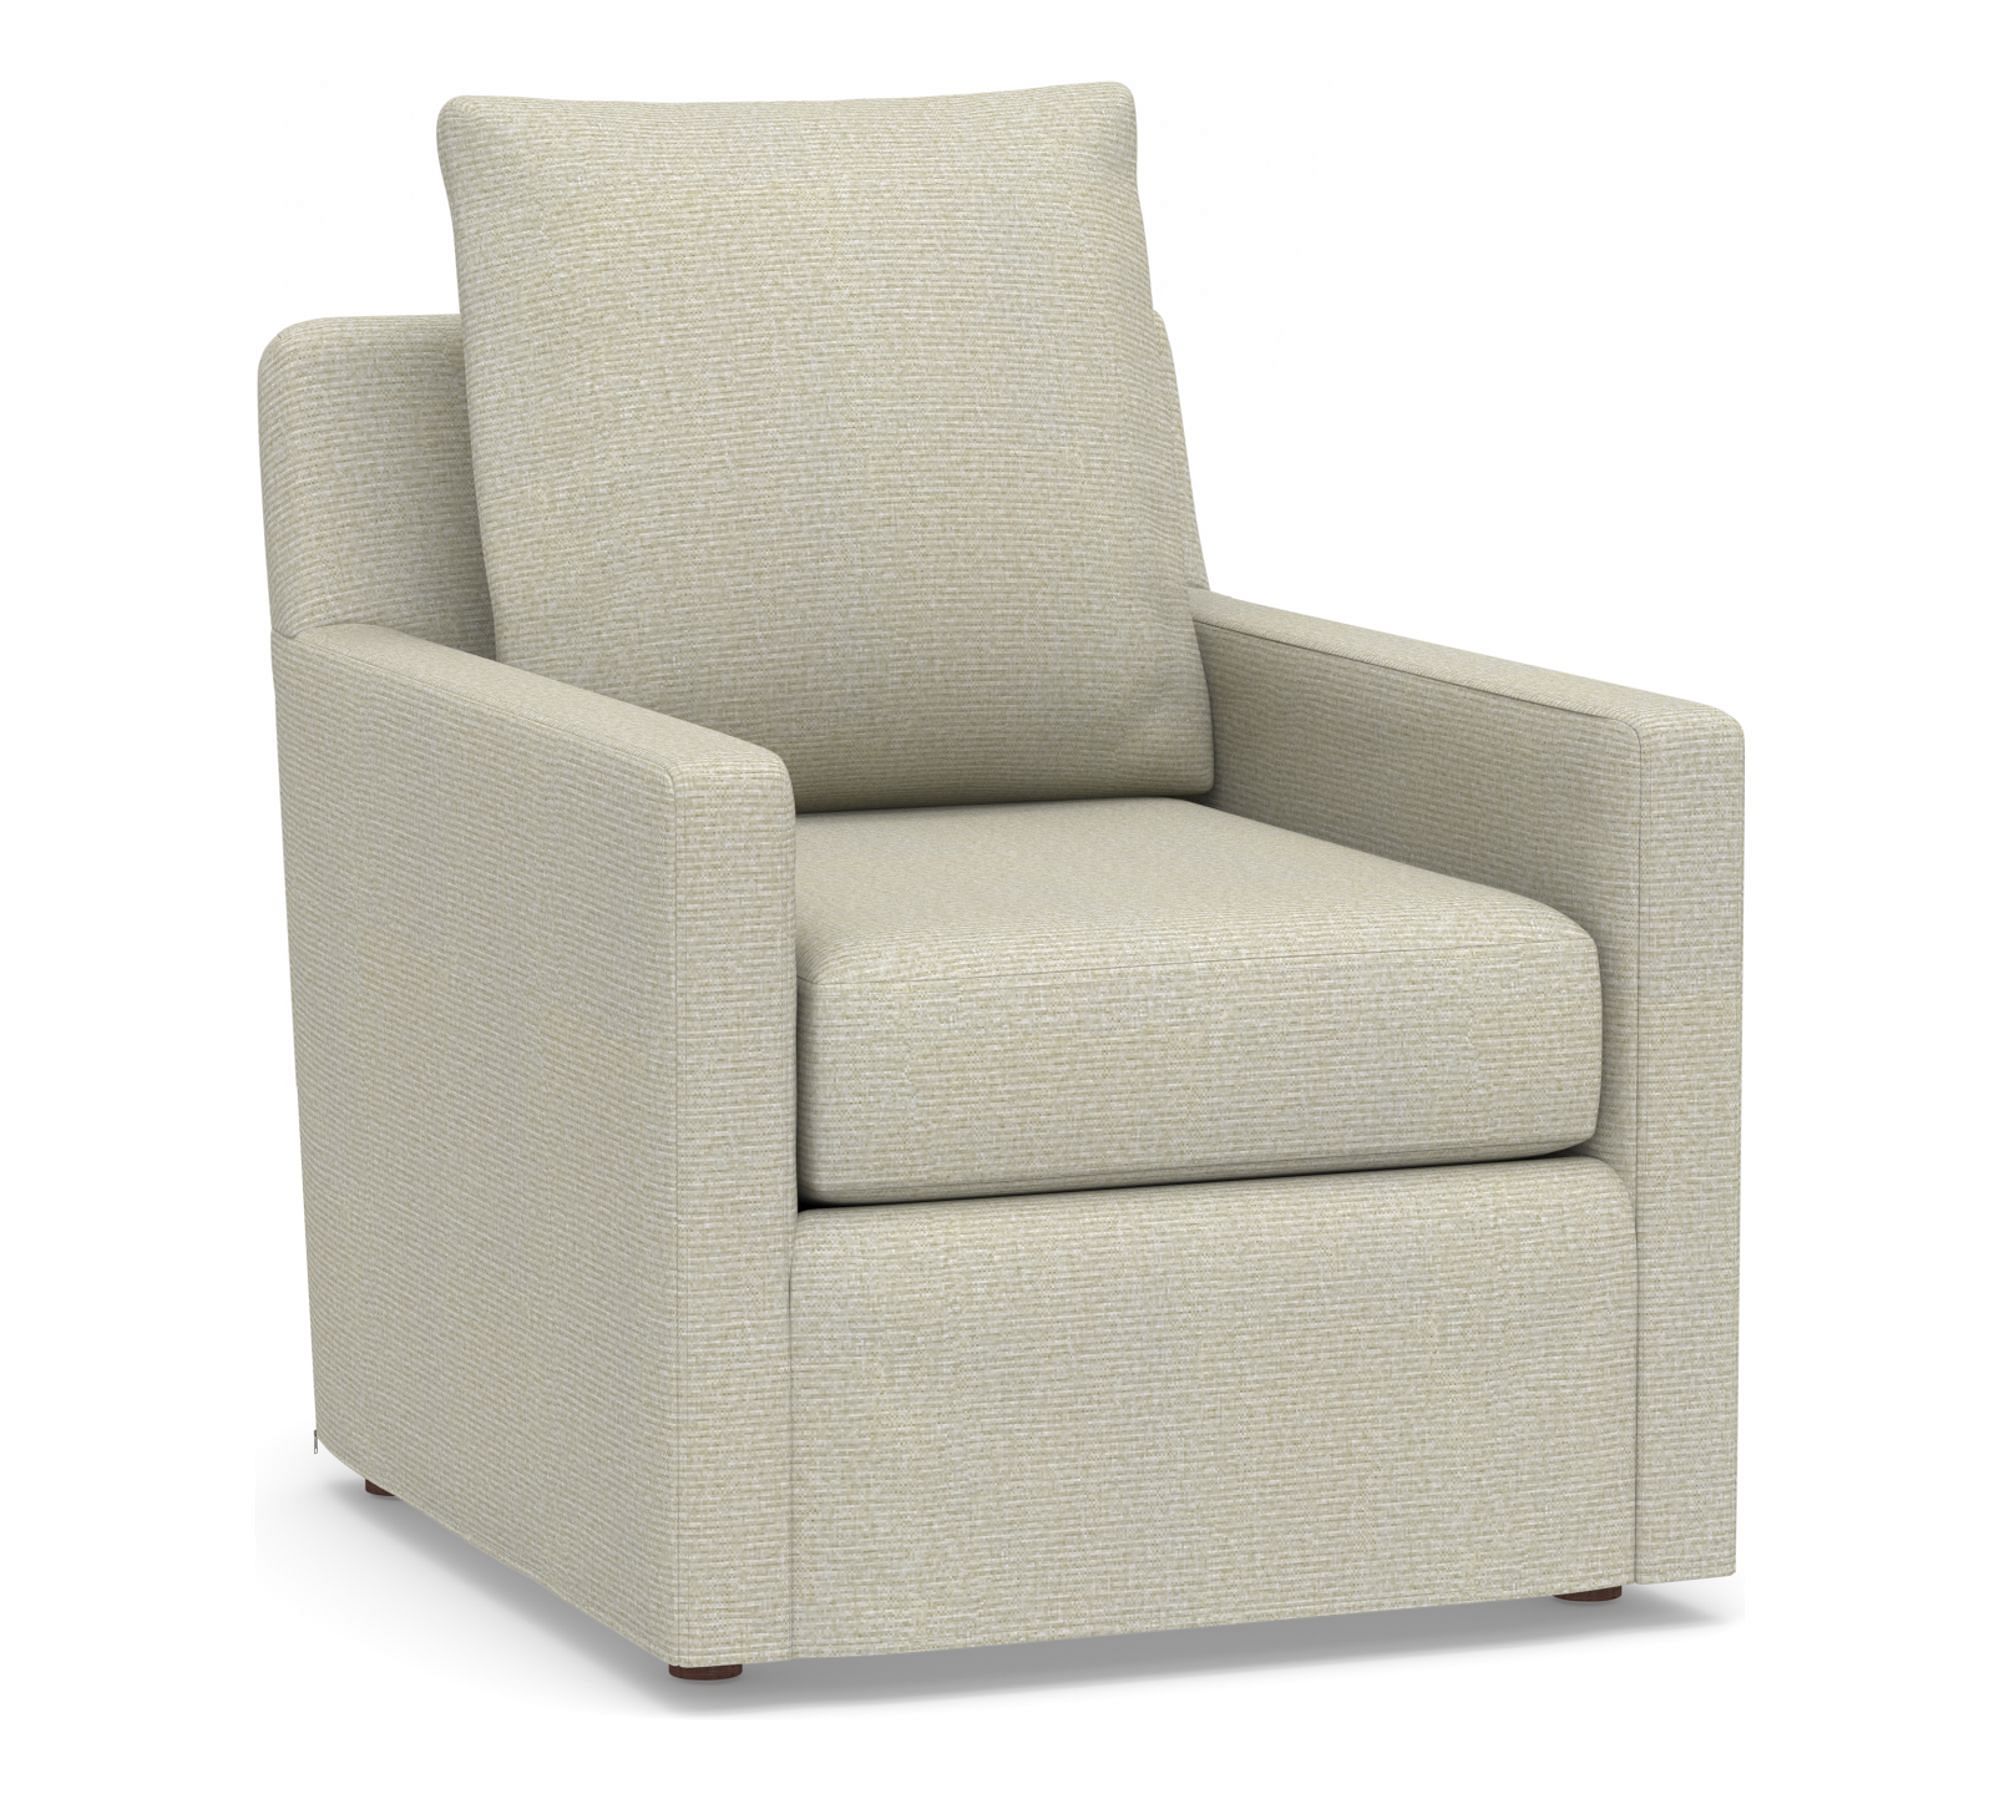 Ayden Square Arm Slipcovered Chair